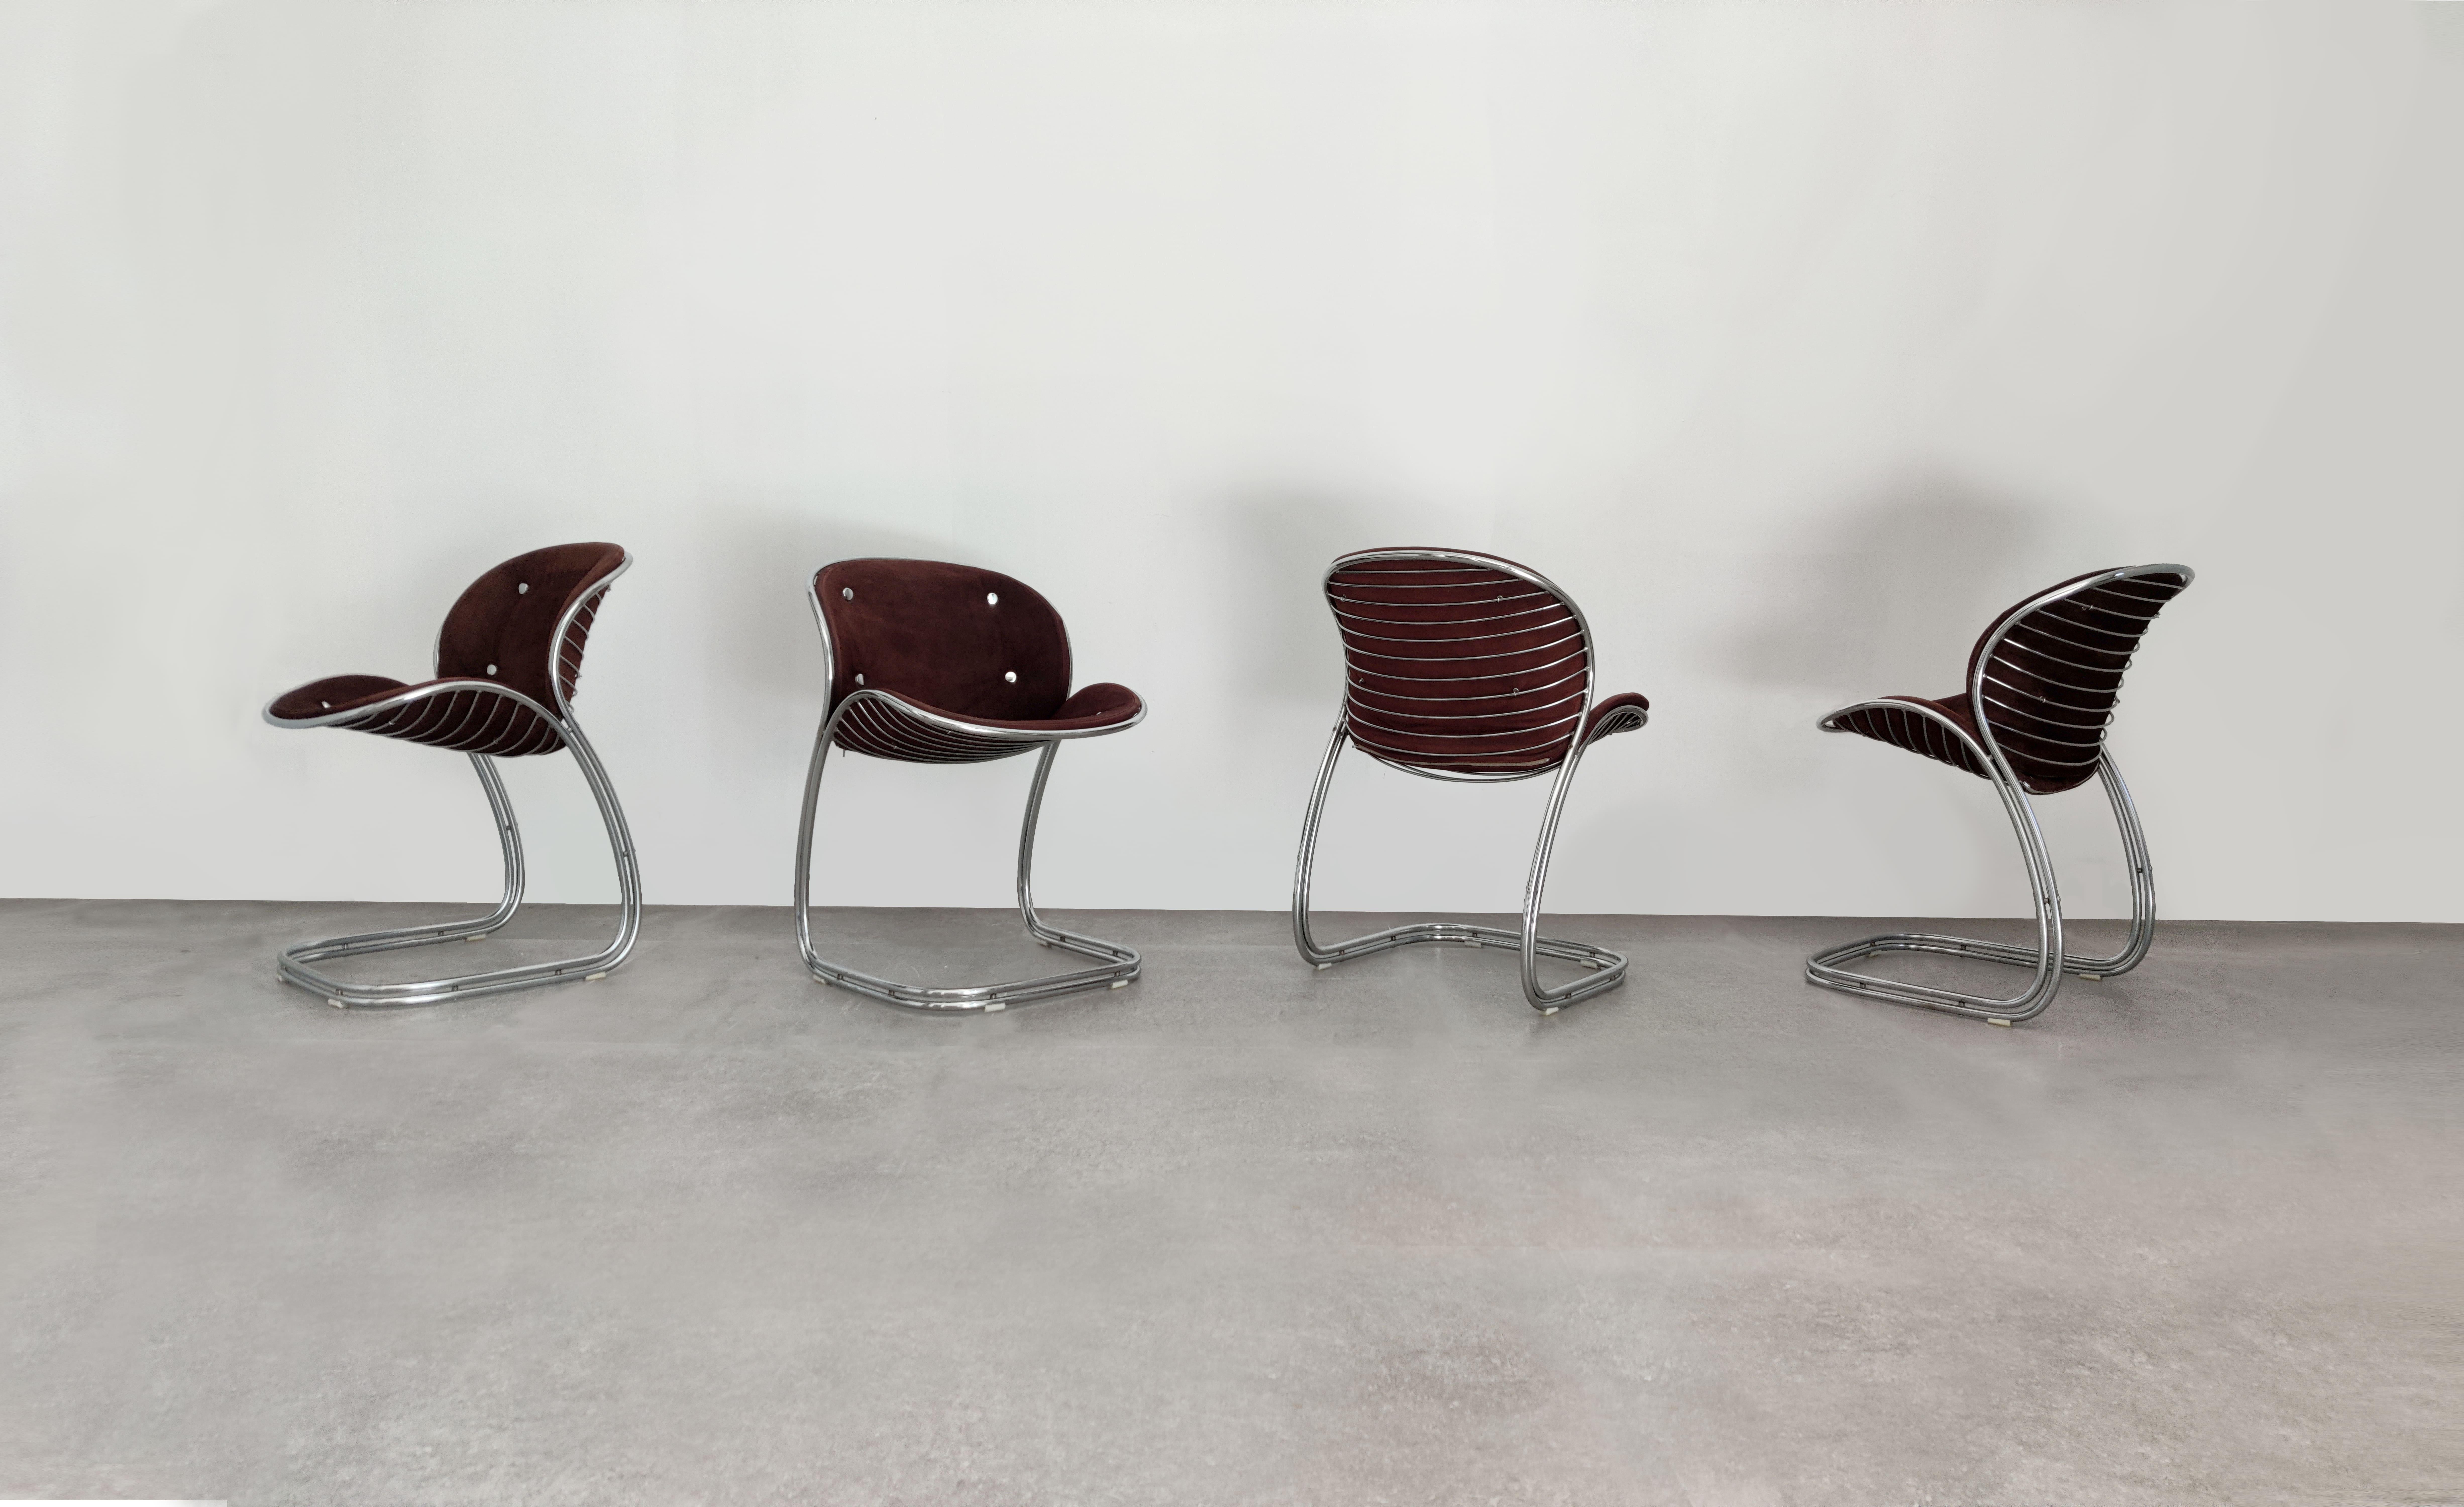 Add a touch of timeless elegance to your home with this stunning set of Sabrina chairs, designed by renowned Italian designer Gastone Rinaldi and produced by Vidal Grau. The chairs feature a sleek and sturdy chrome frame that beautifully complements